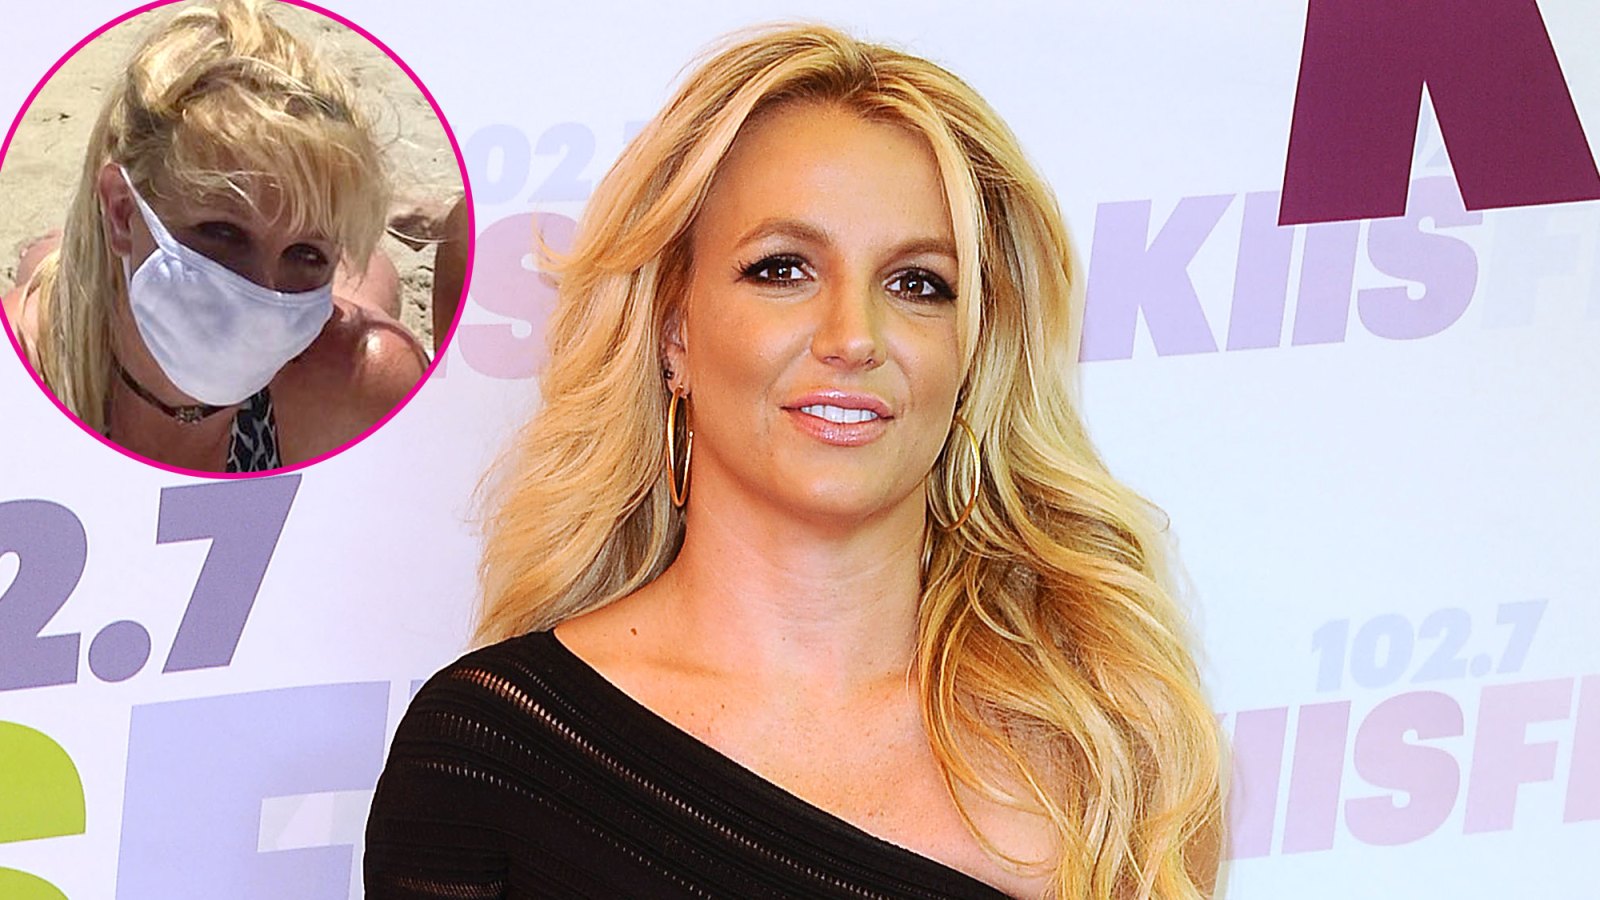 Britney Spears Was ‘Grounded for Weeks’ After Taking Her Mask Off at the Beach During Pandemic: Book